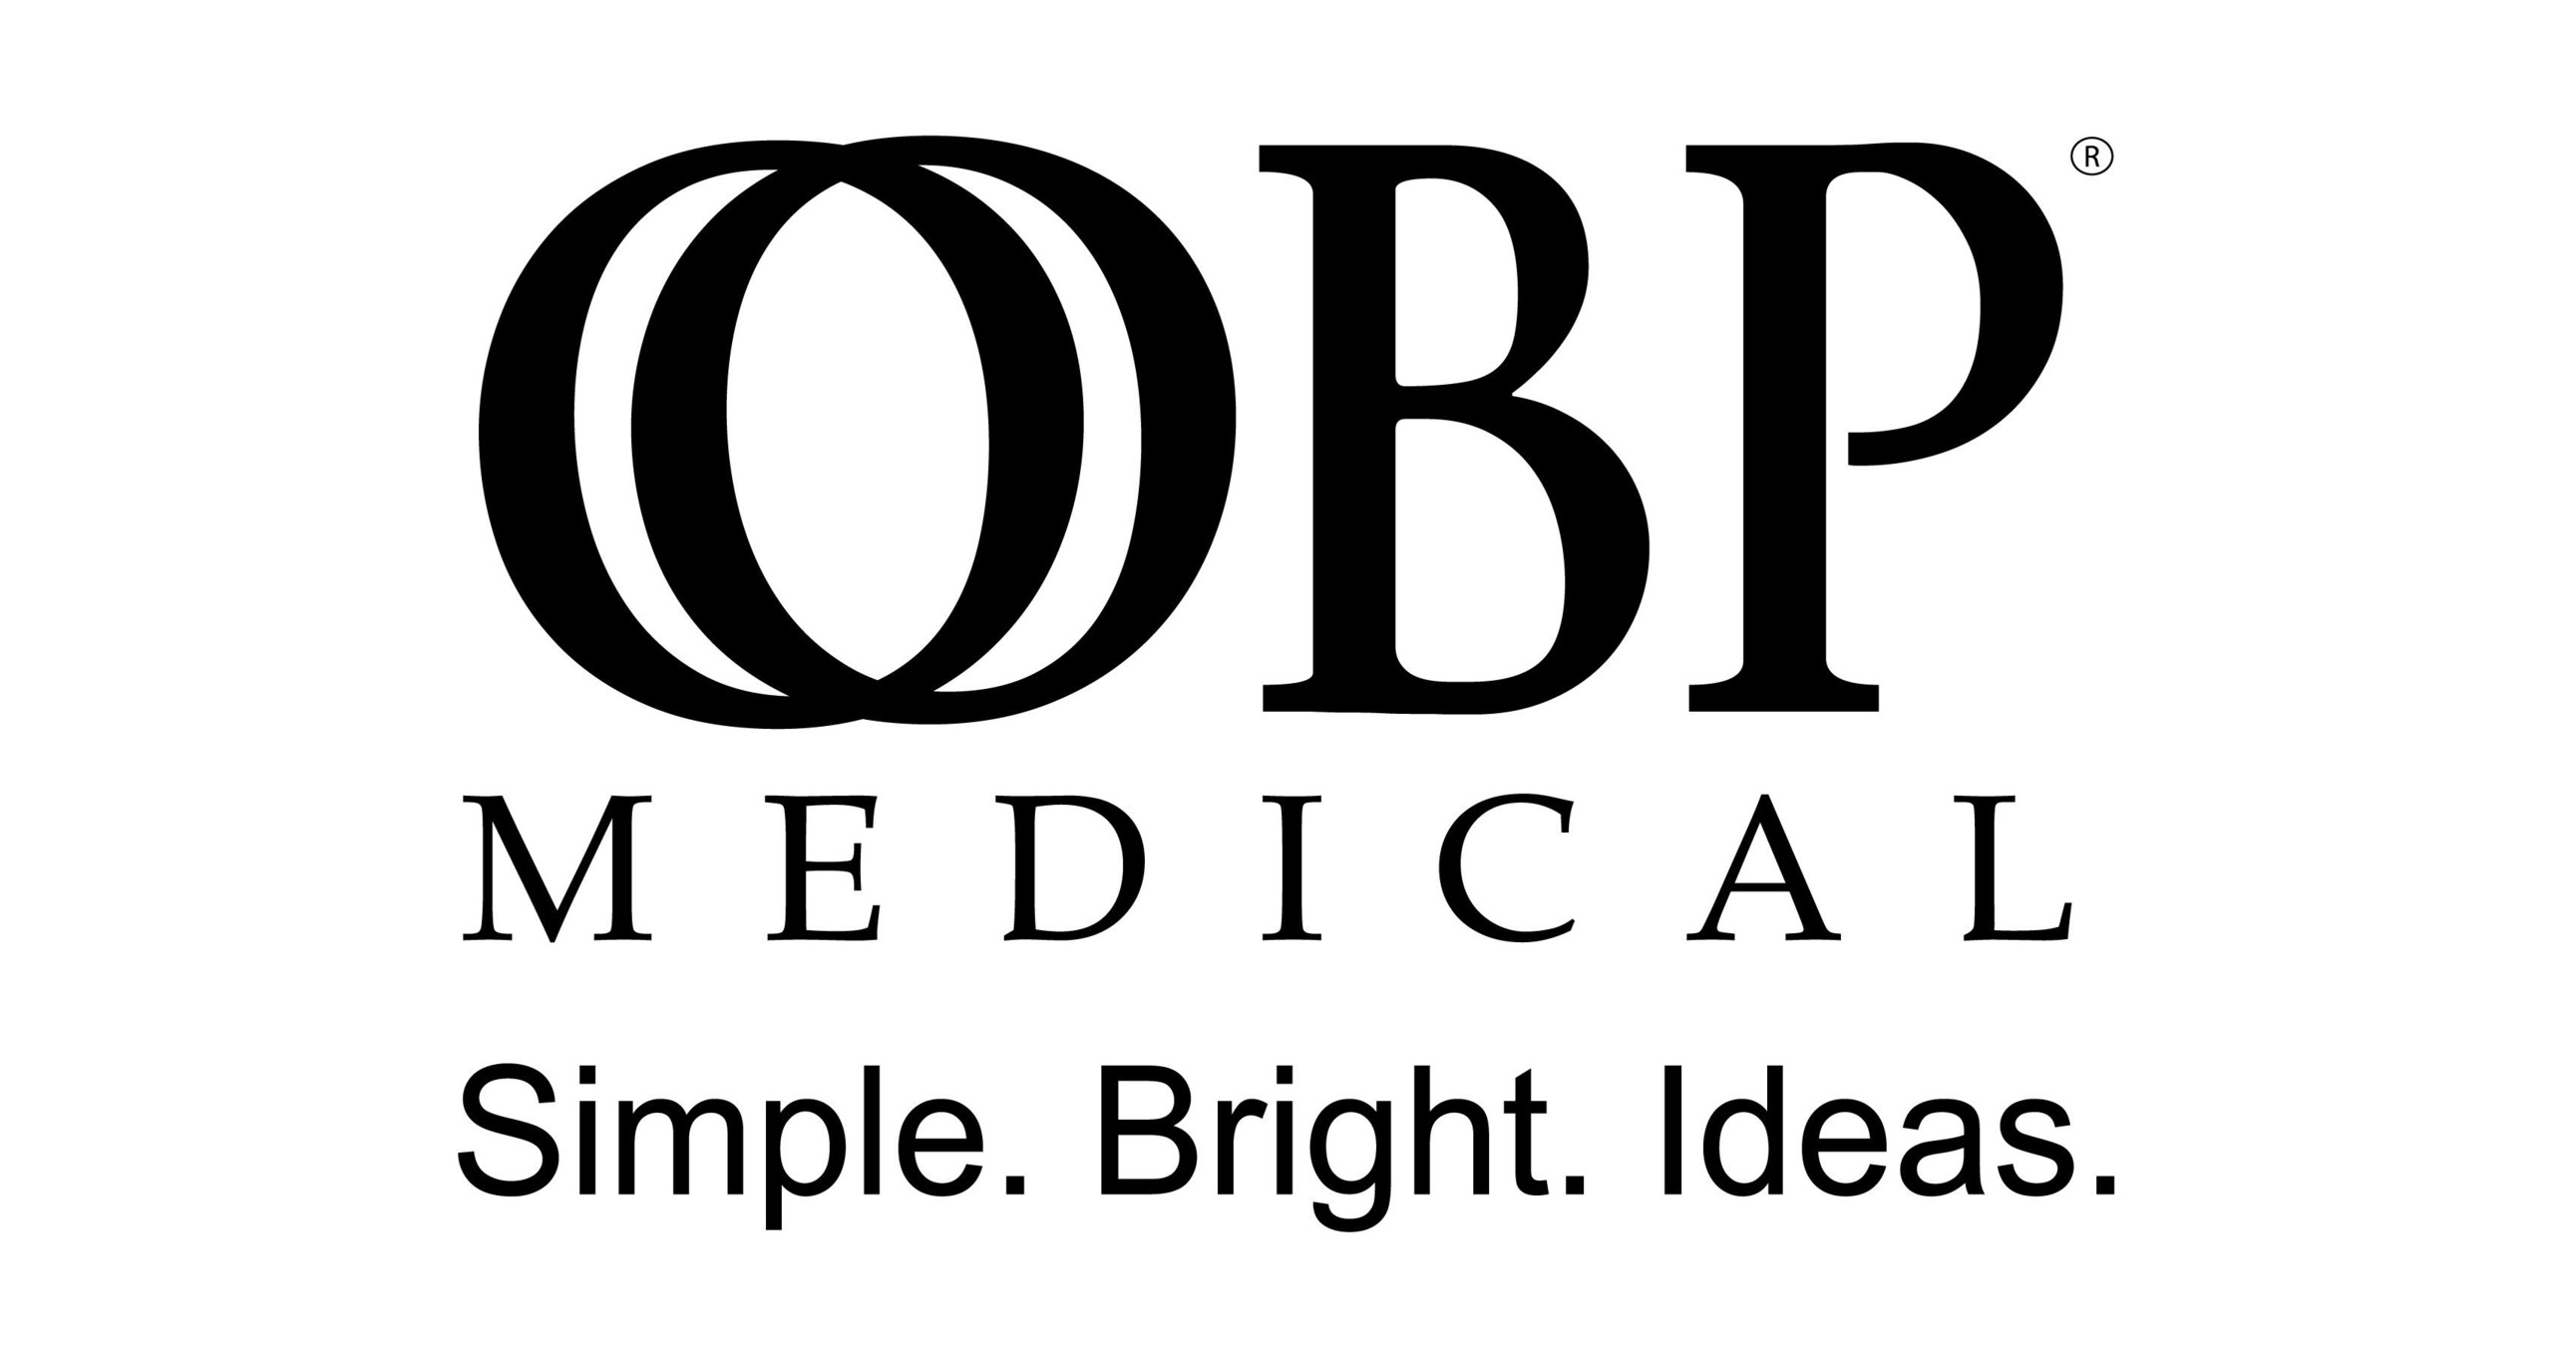 OBP Medical Announces ONETRAC Regulatory Approval in Canada